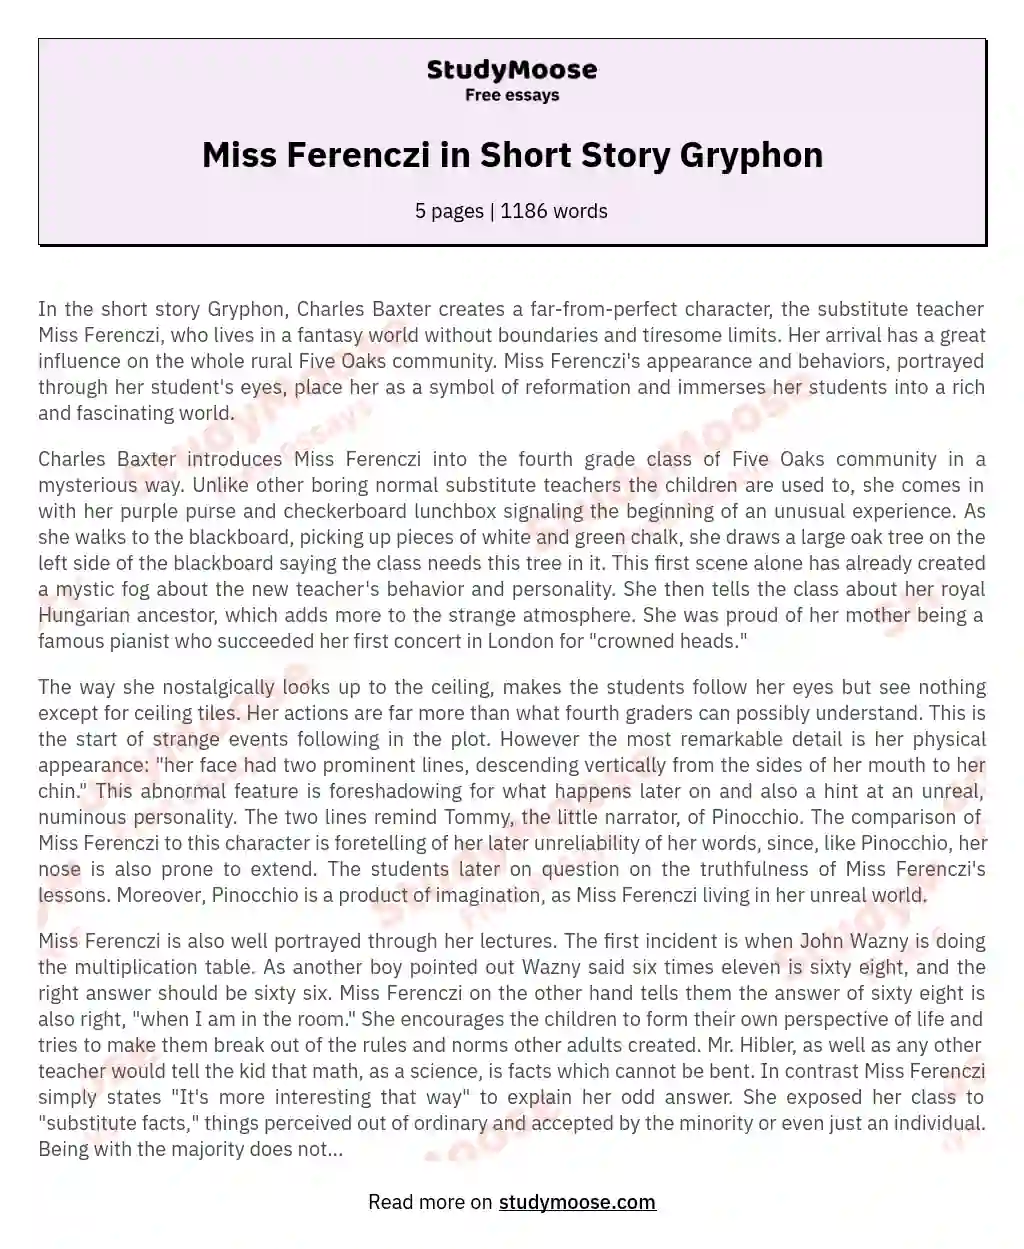 Miss Ferenczi in Short Story Gryphon essay